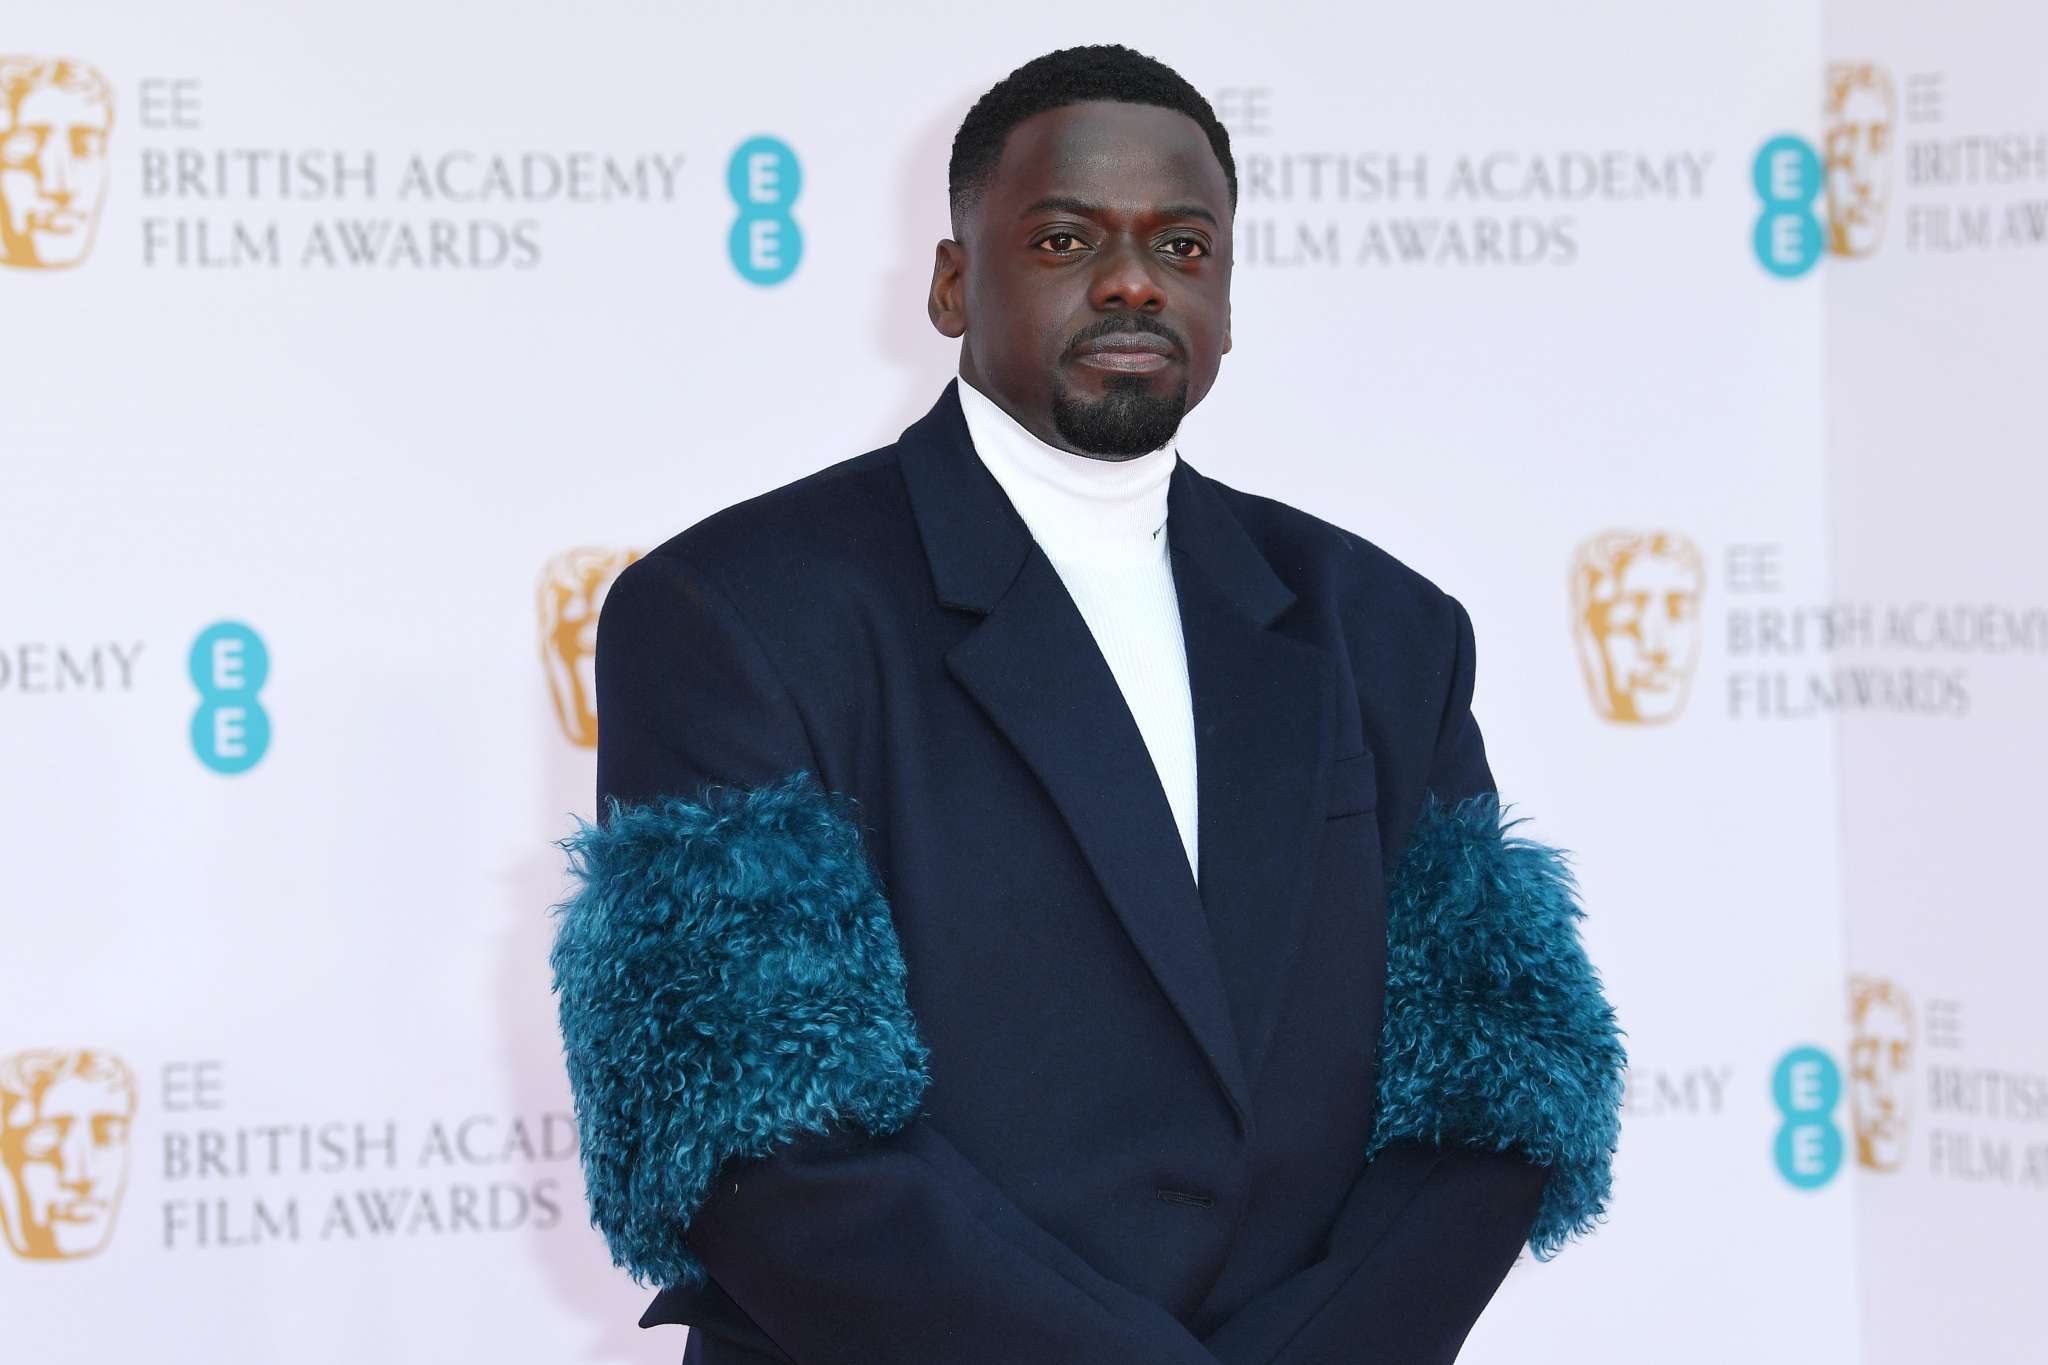 Black Panther Star Daniel Kaluuya Will Not Return For The Film's Sequel